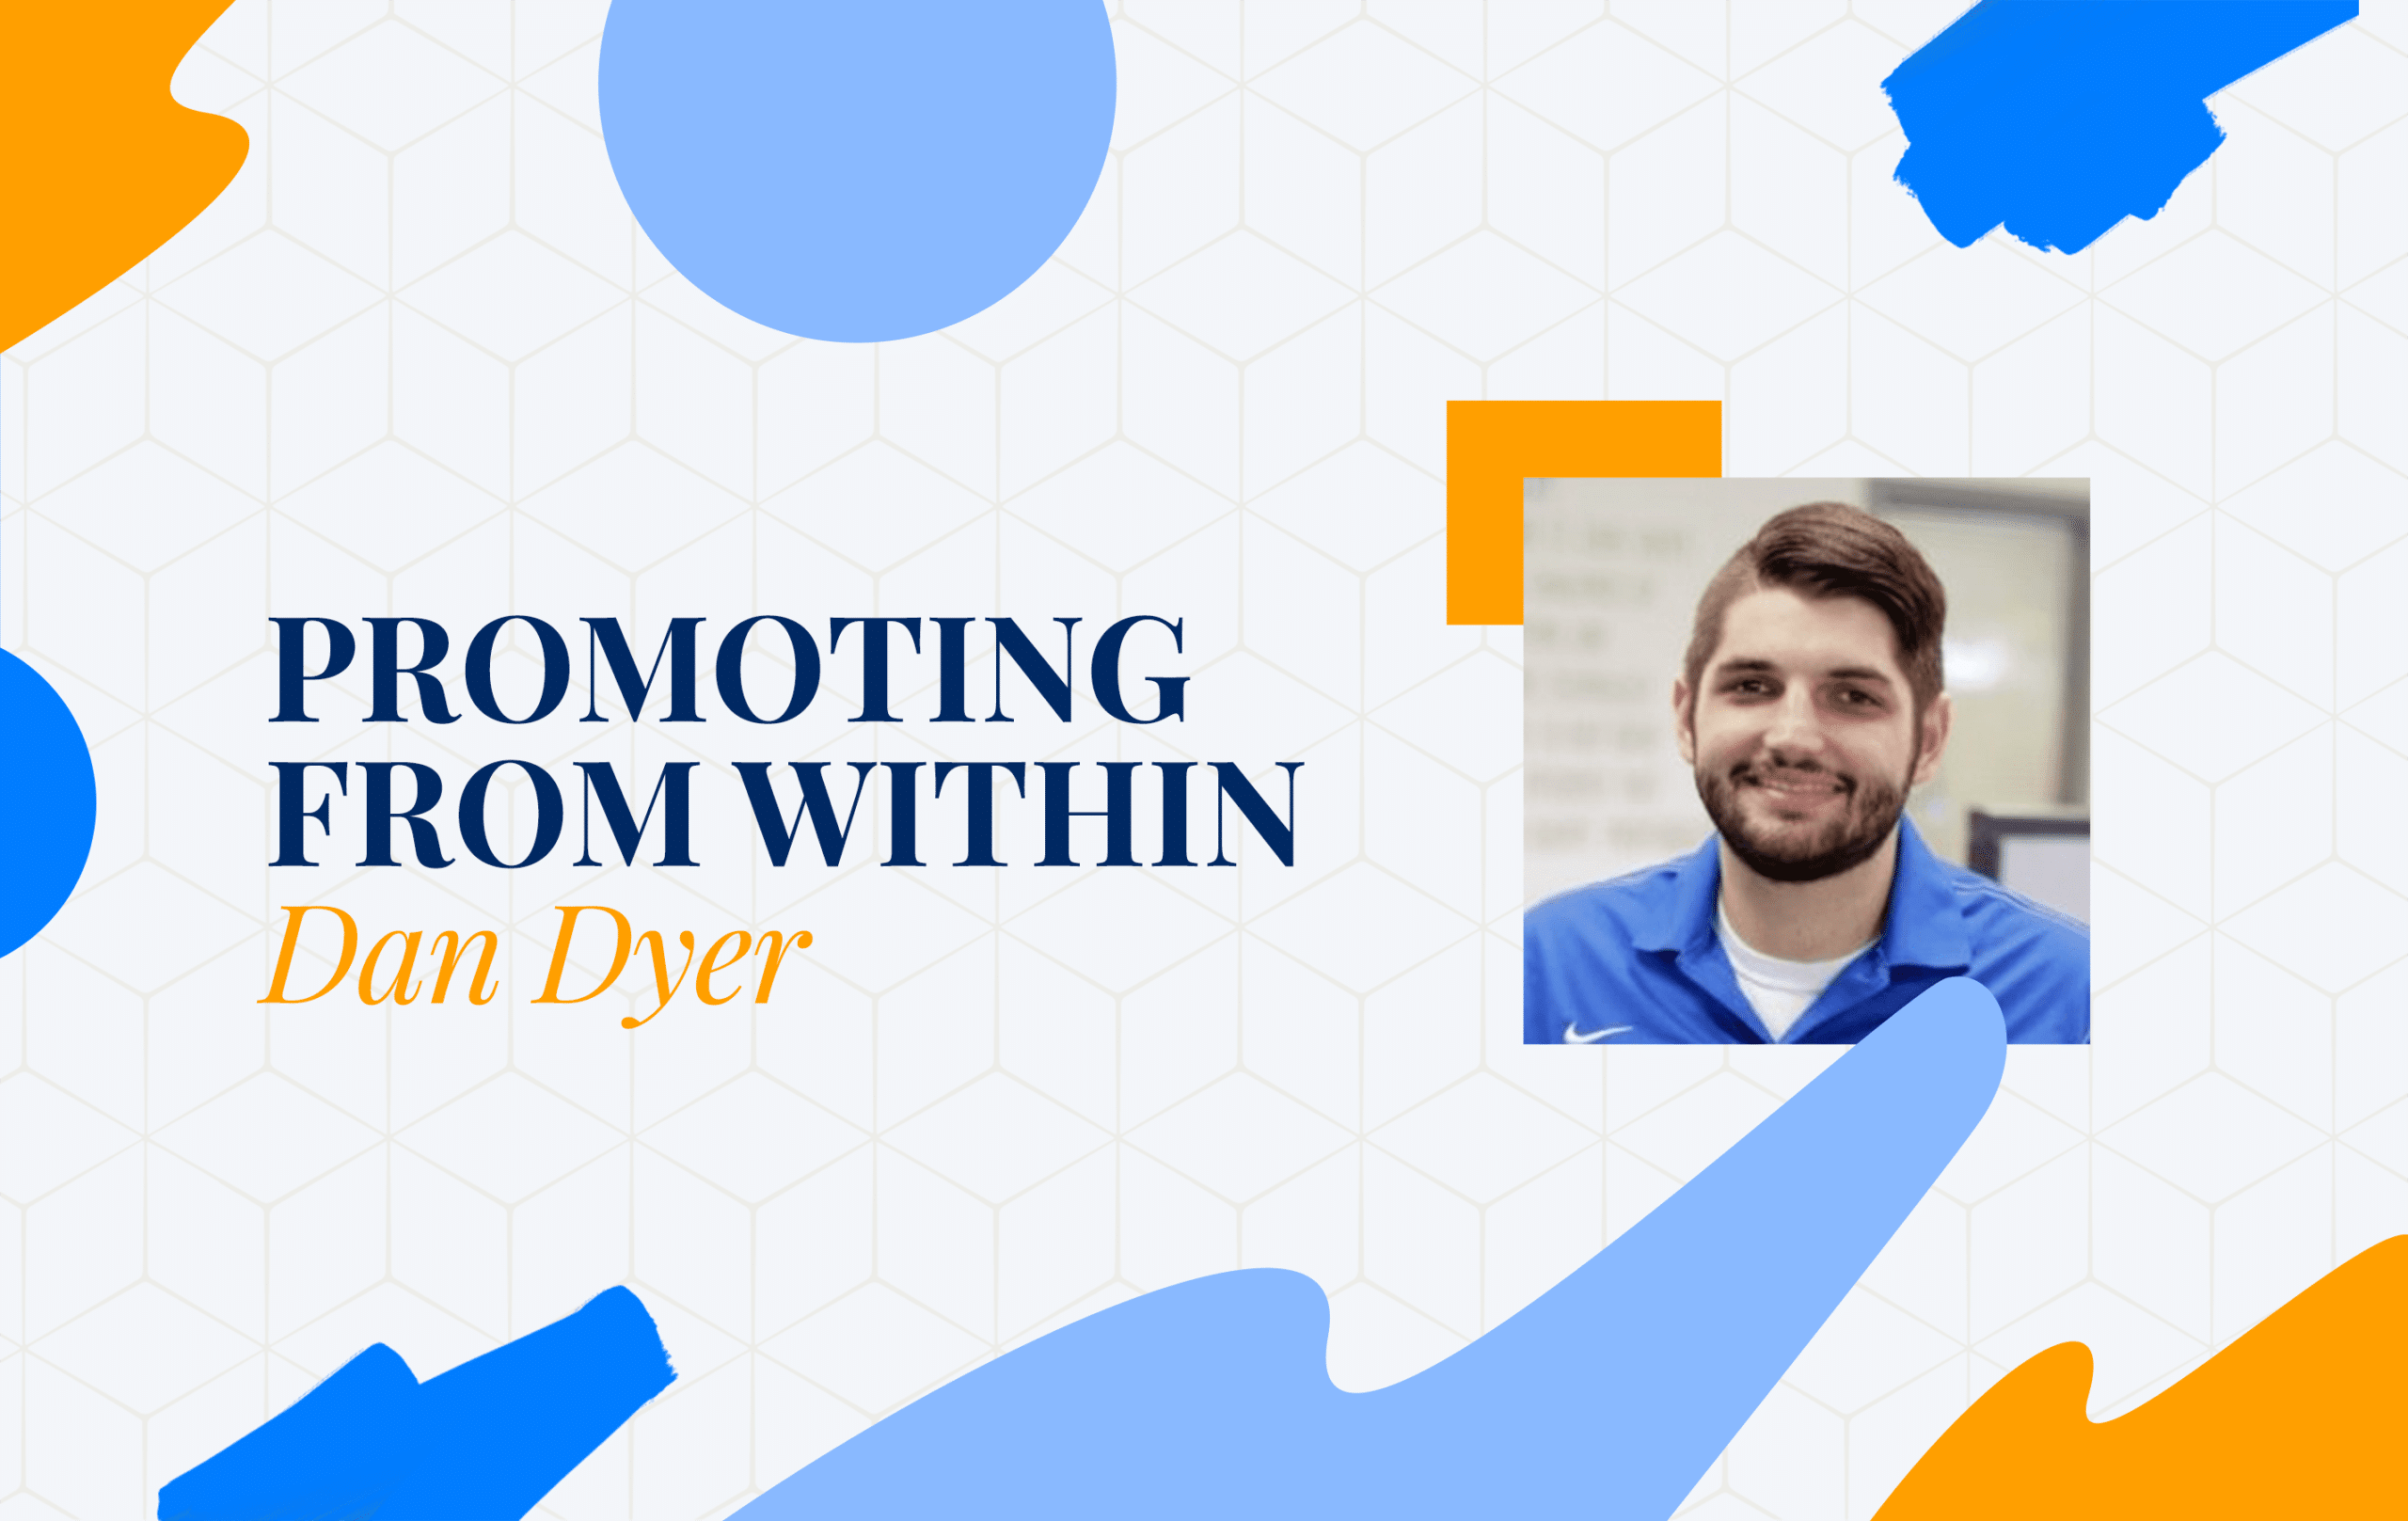 promoting from within: Dan Dyer